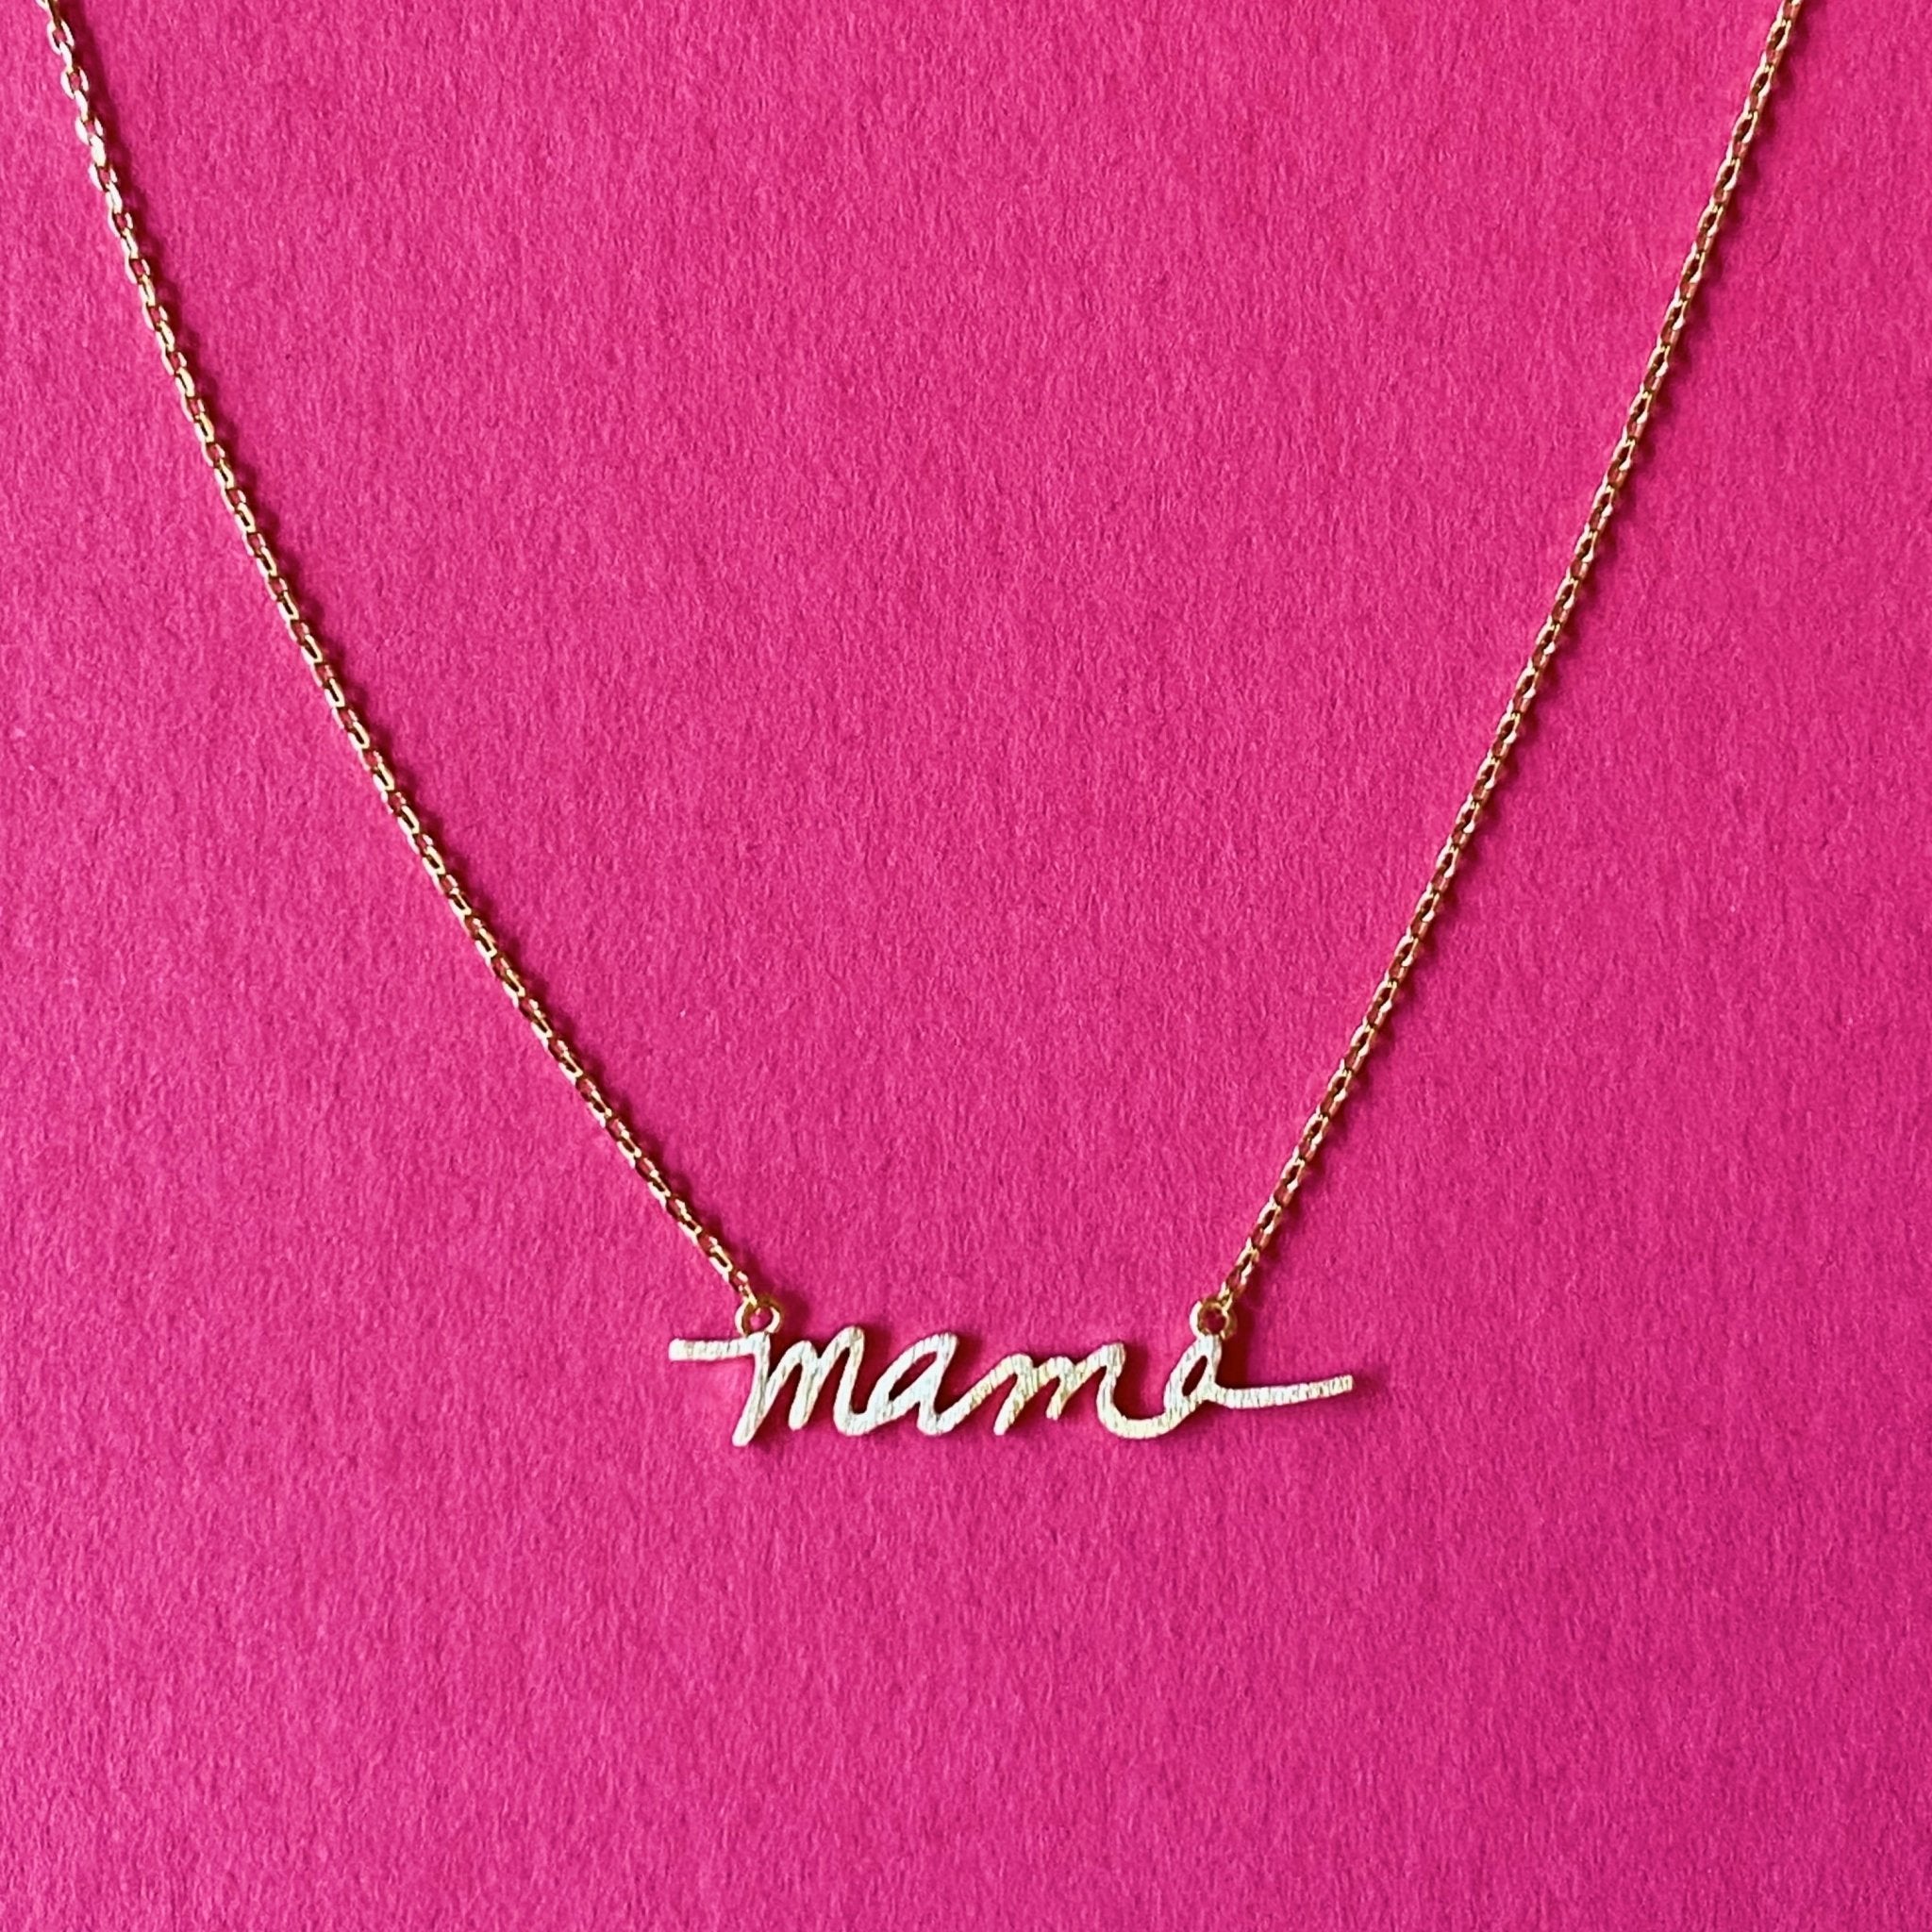 Mama Script Necklace - The Kindness Cause